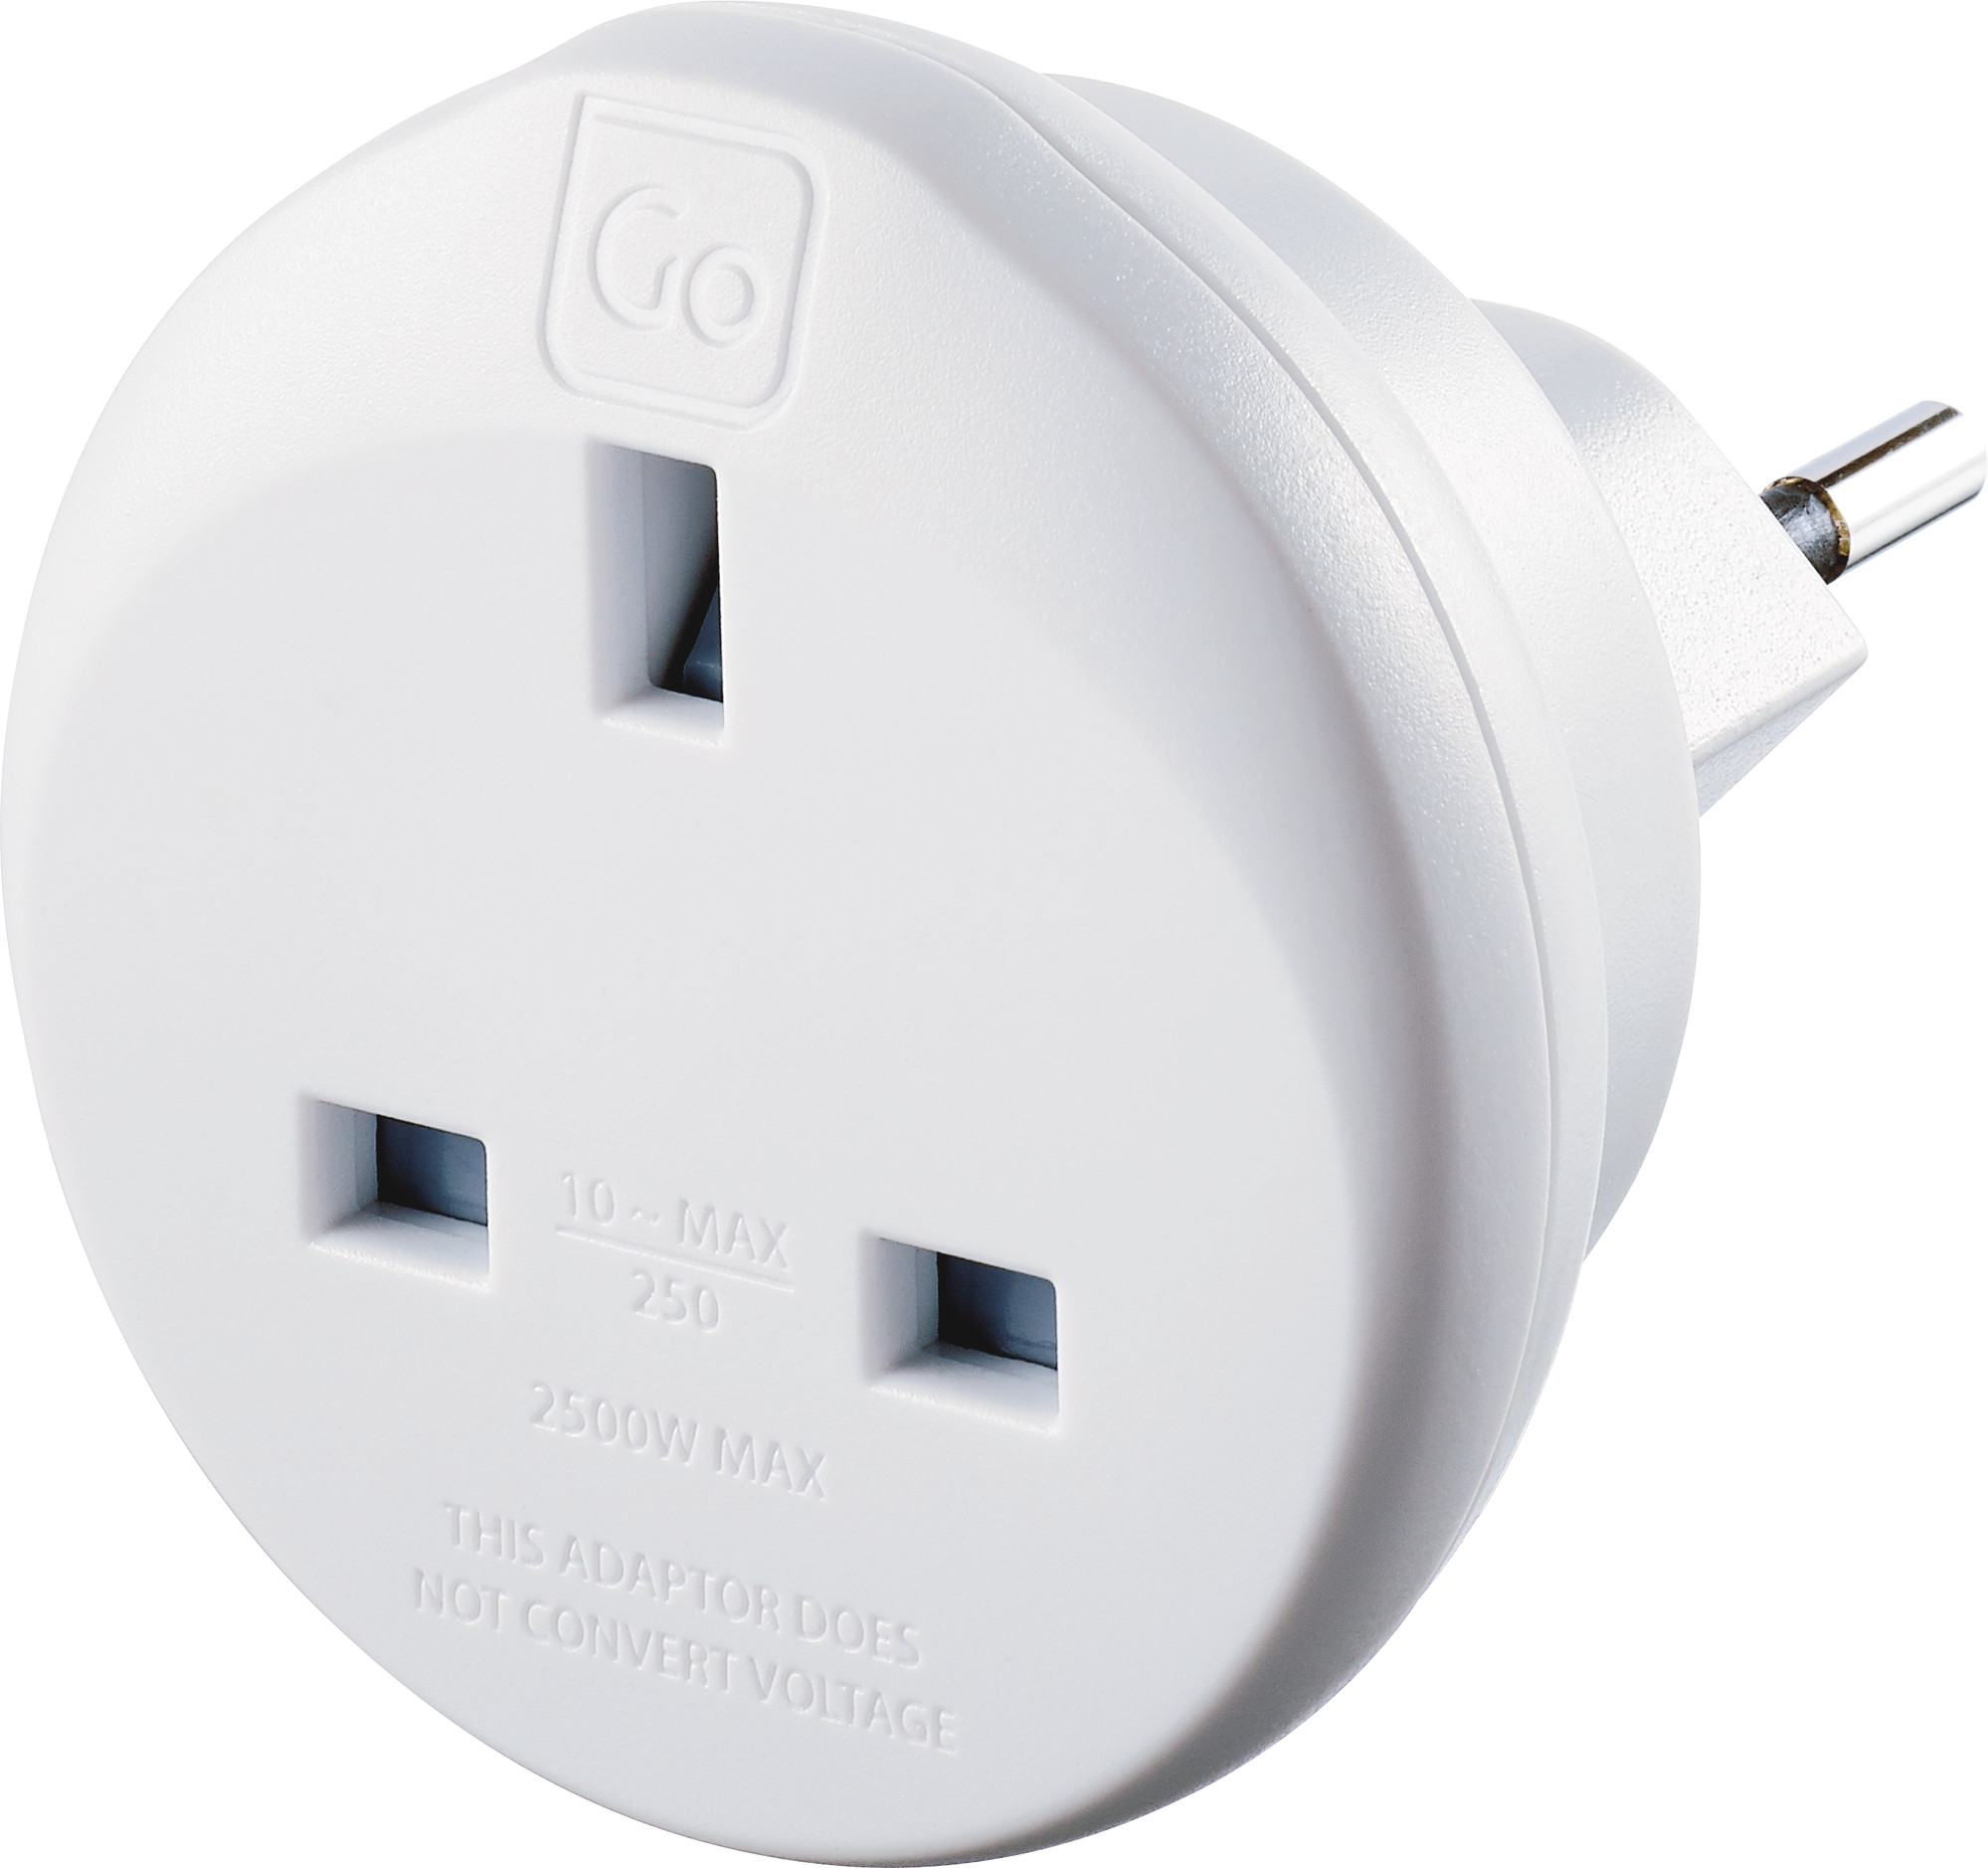 Picture of Go Travel UK Swiss Adapter